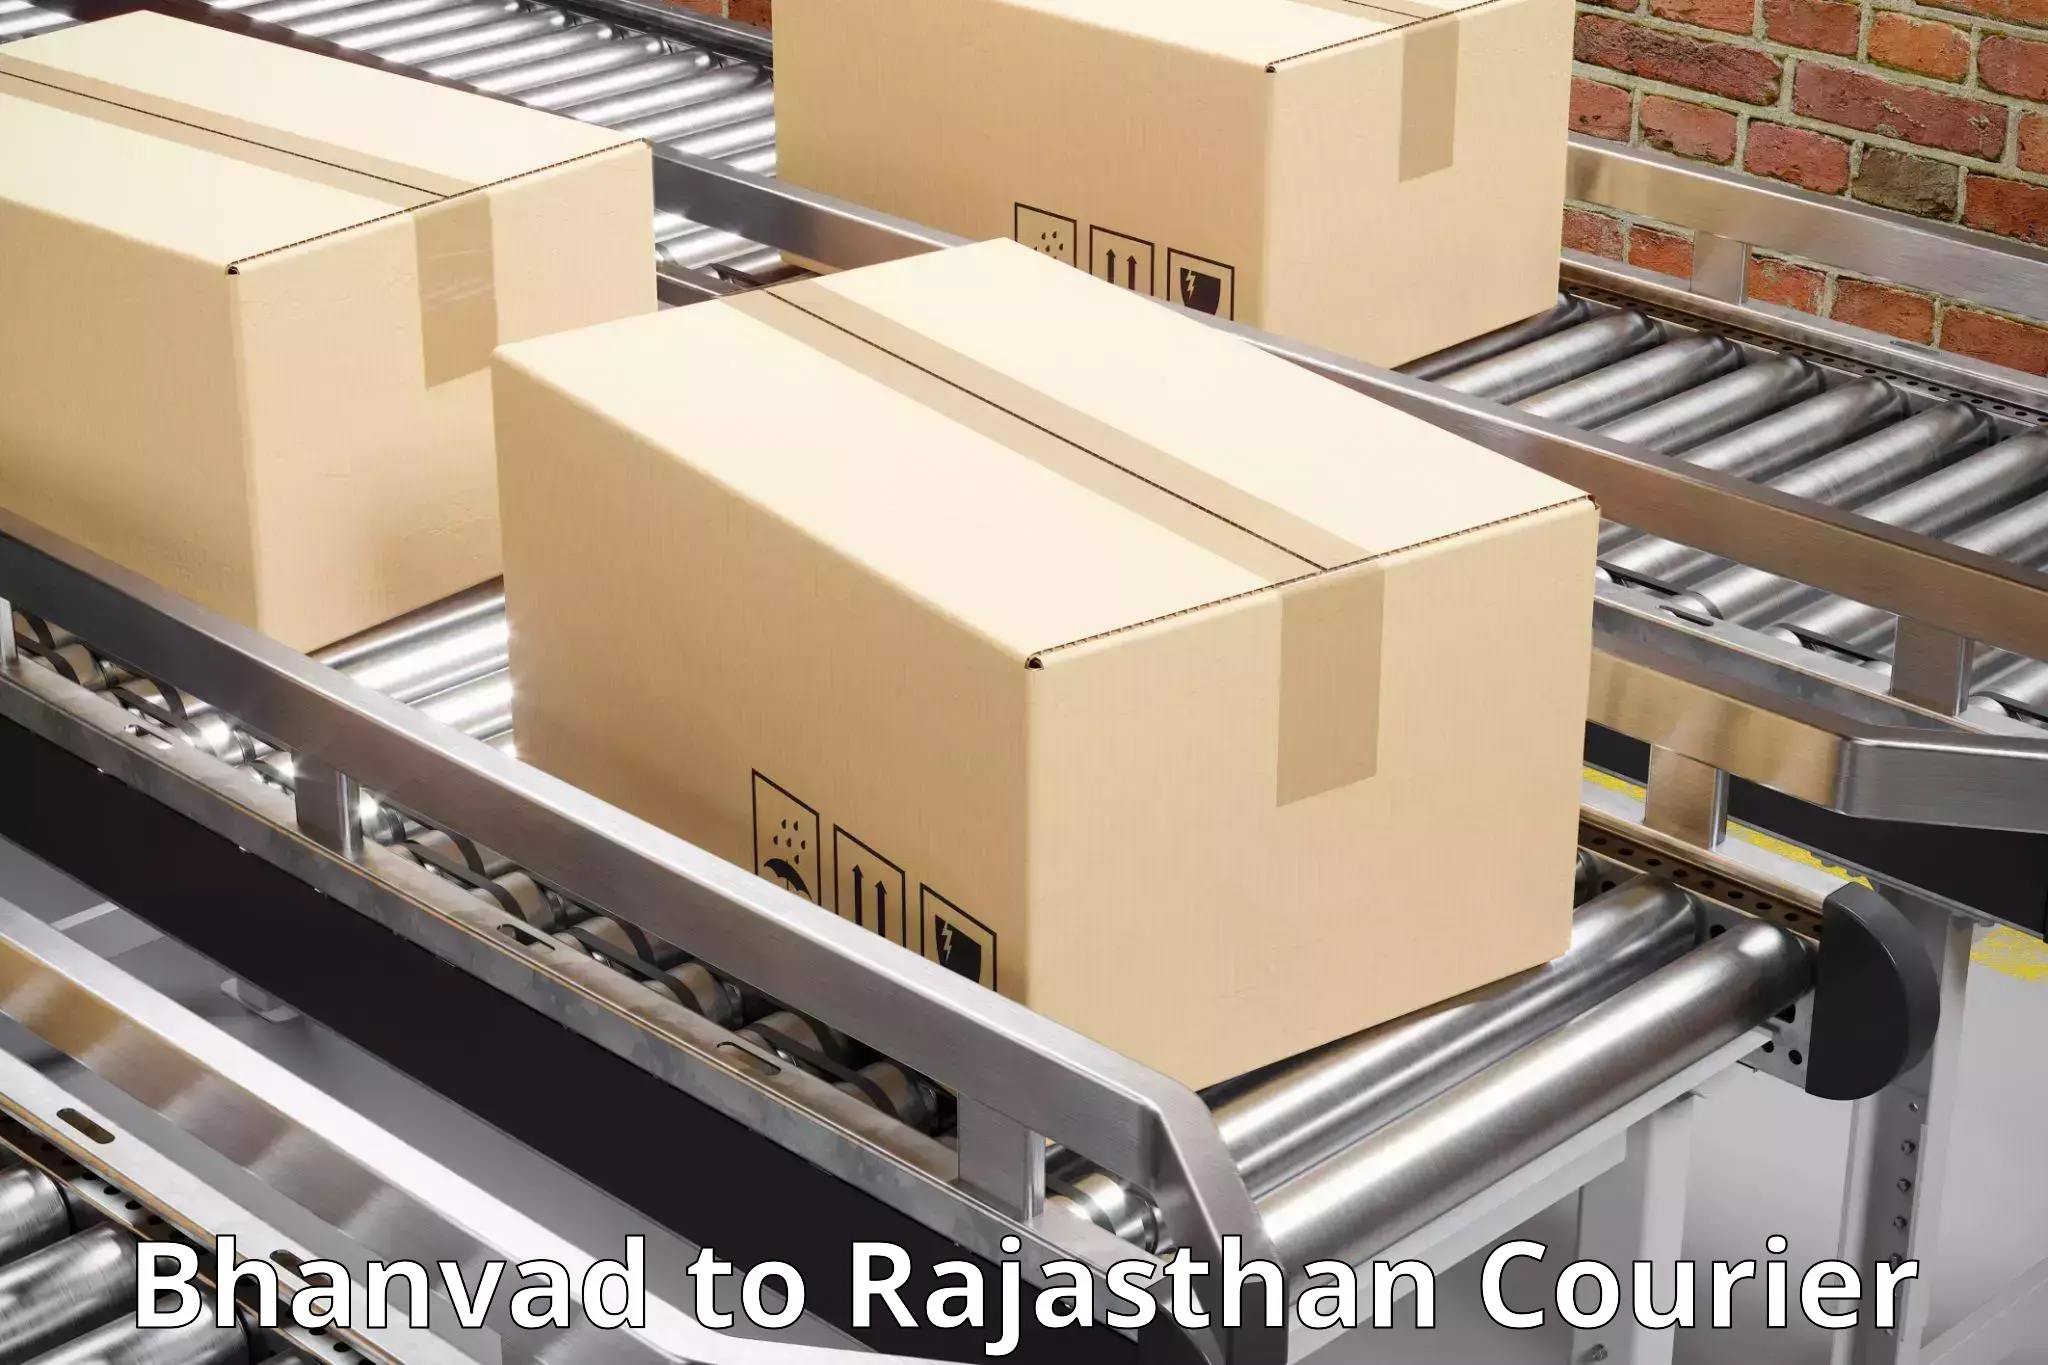 Seamless shipping service Bhanvad to Srimadhopur